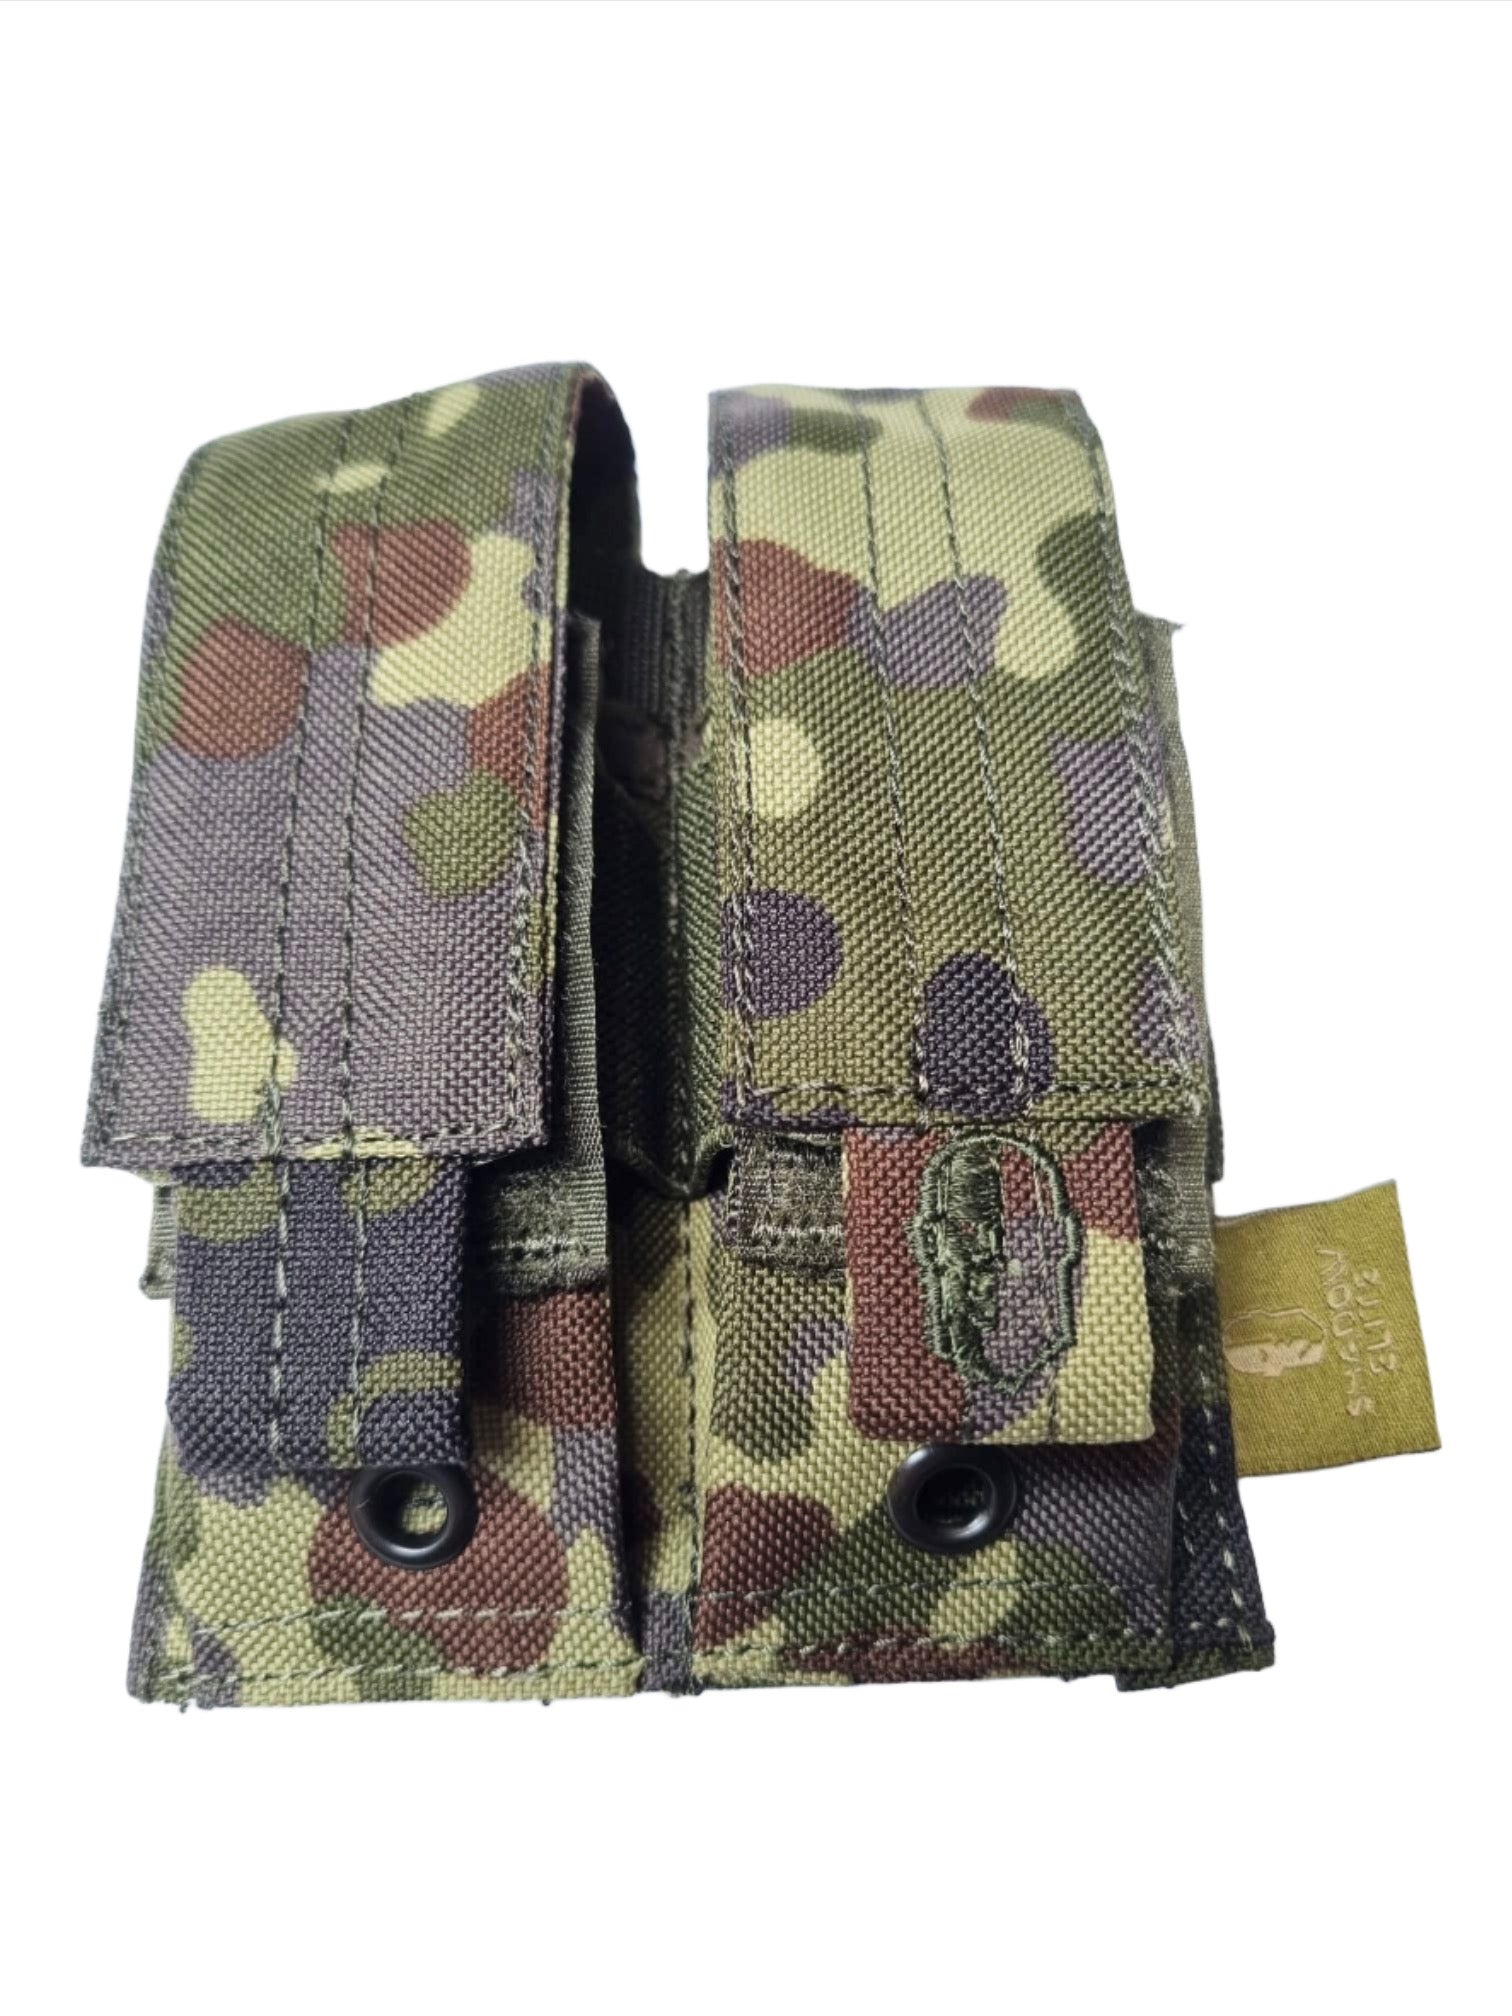 SHE-1065 Double Pistol Mag Pouch-Flectarn